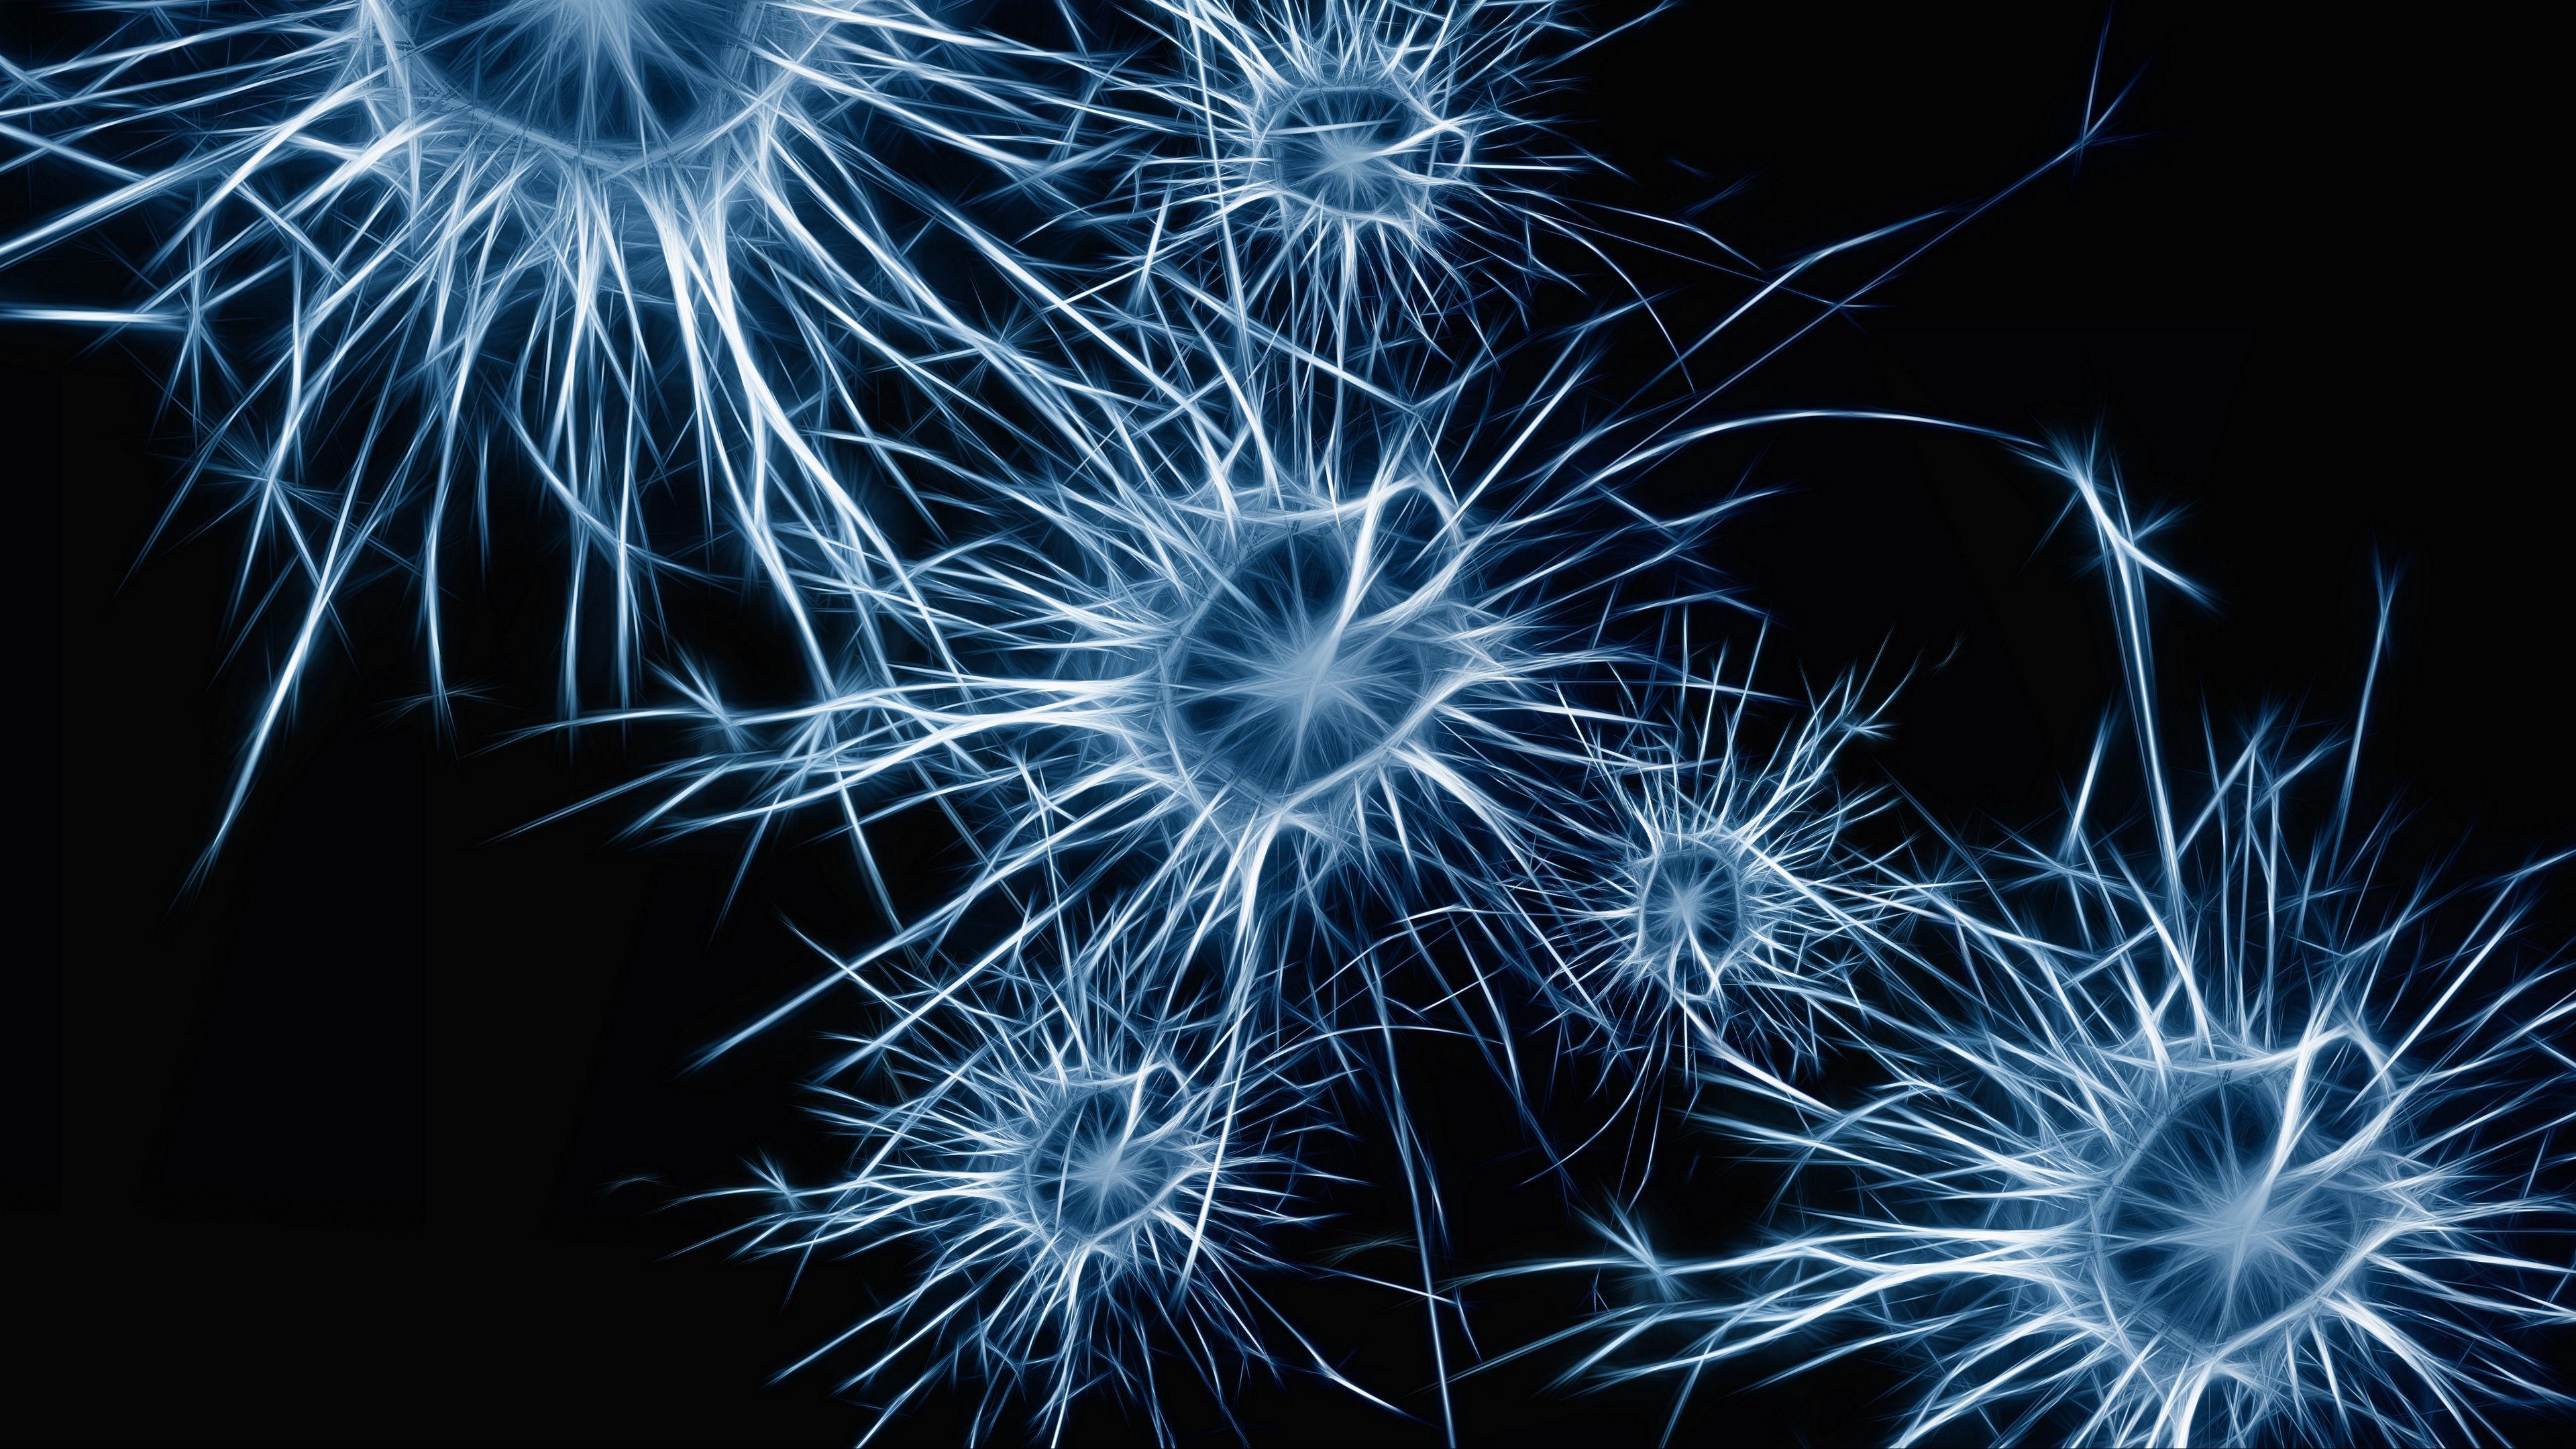 Neurons On A Dark Background With Lights 3d Illustration Of Neuron Cells  With Light Pulses On A Light Background Hd Photography Photo Background  Image And Wallpaper for Free Download